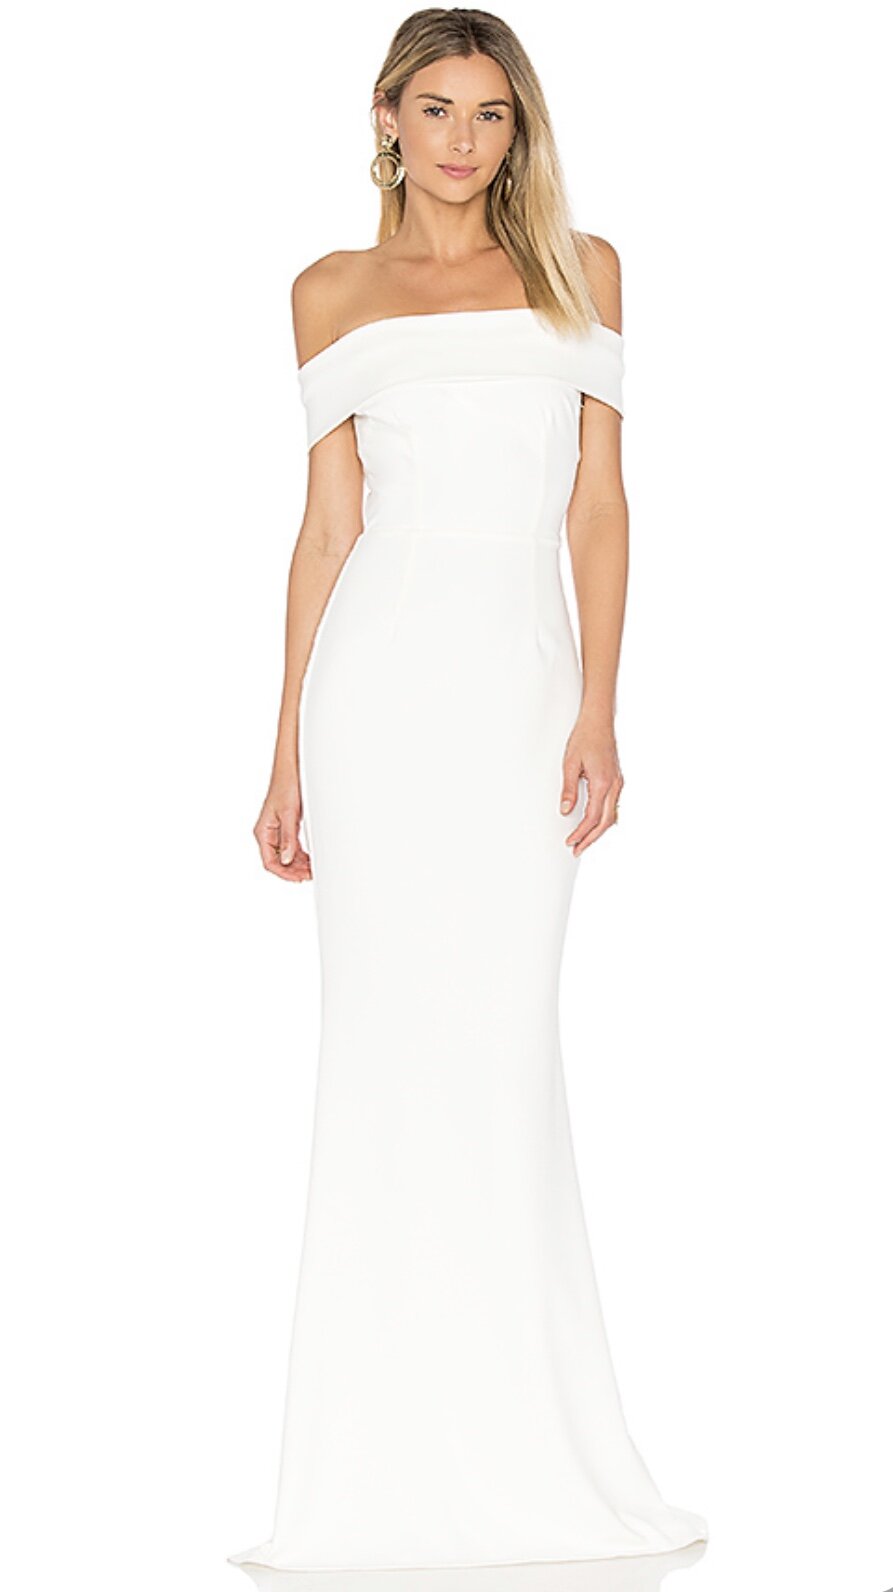 Legacy Gown $197